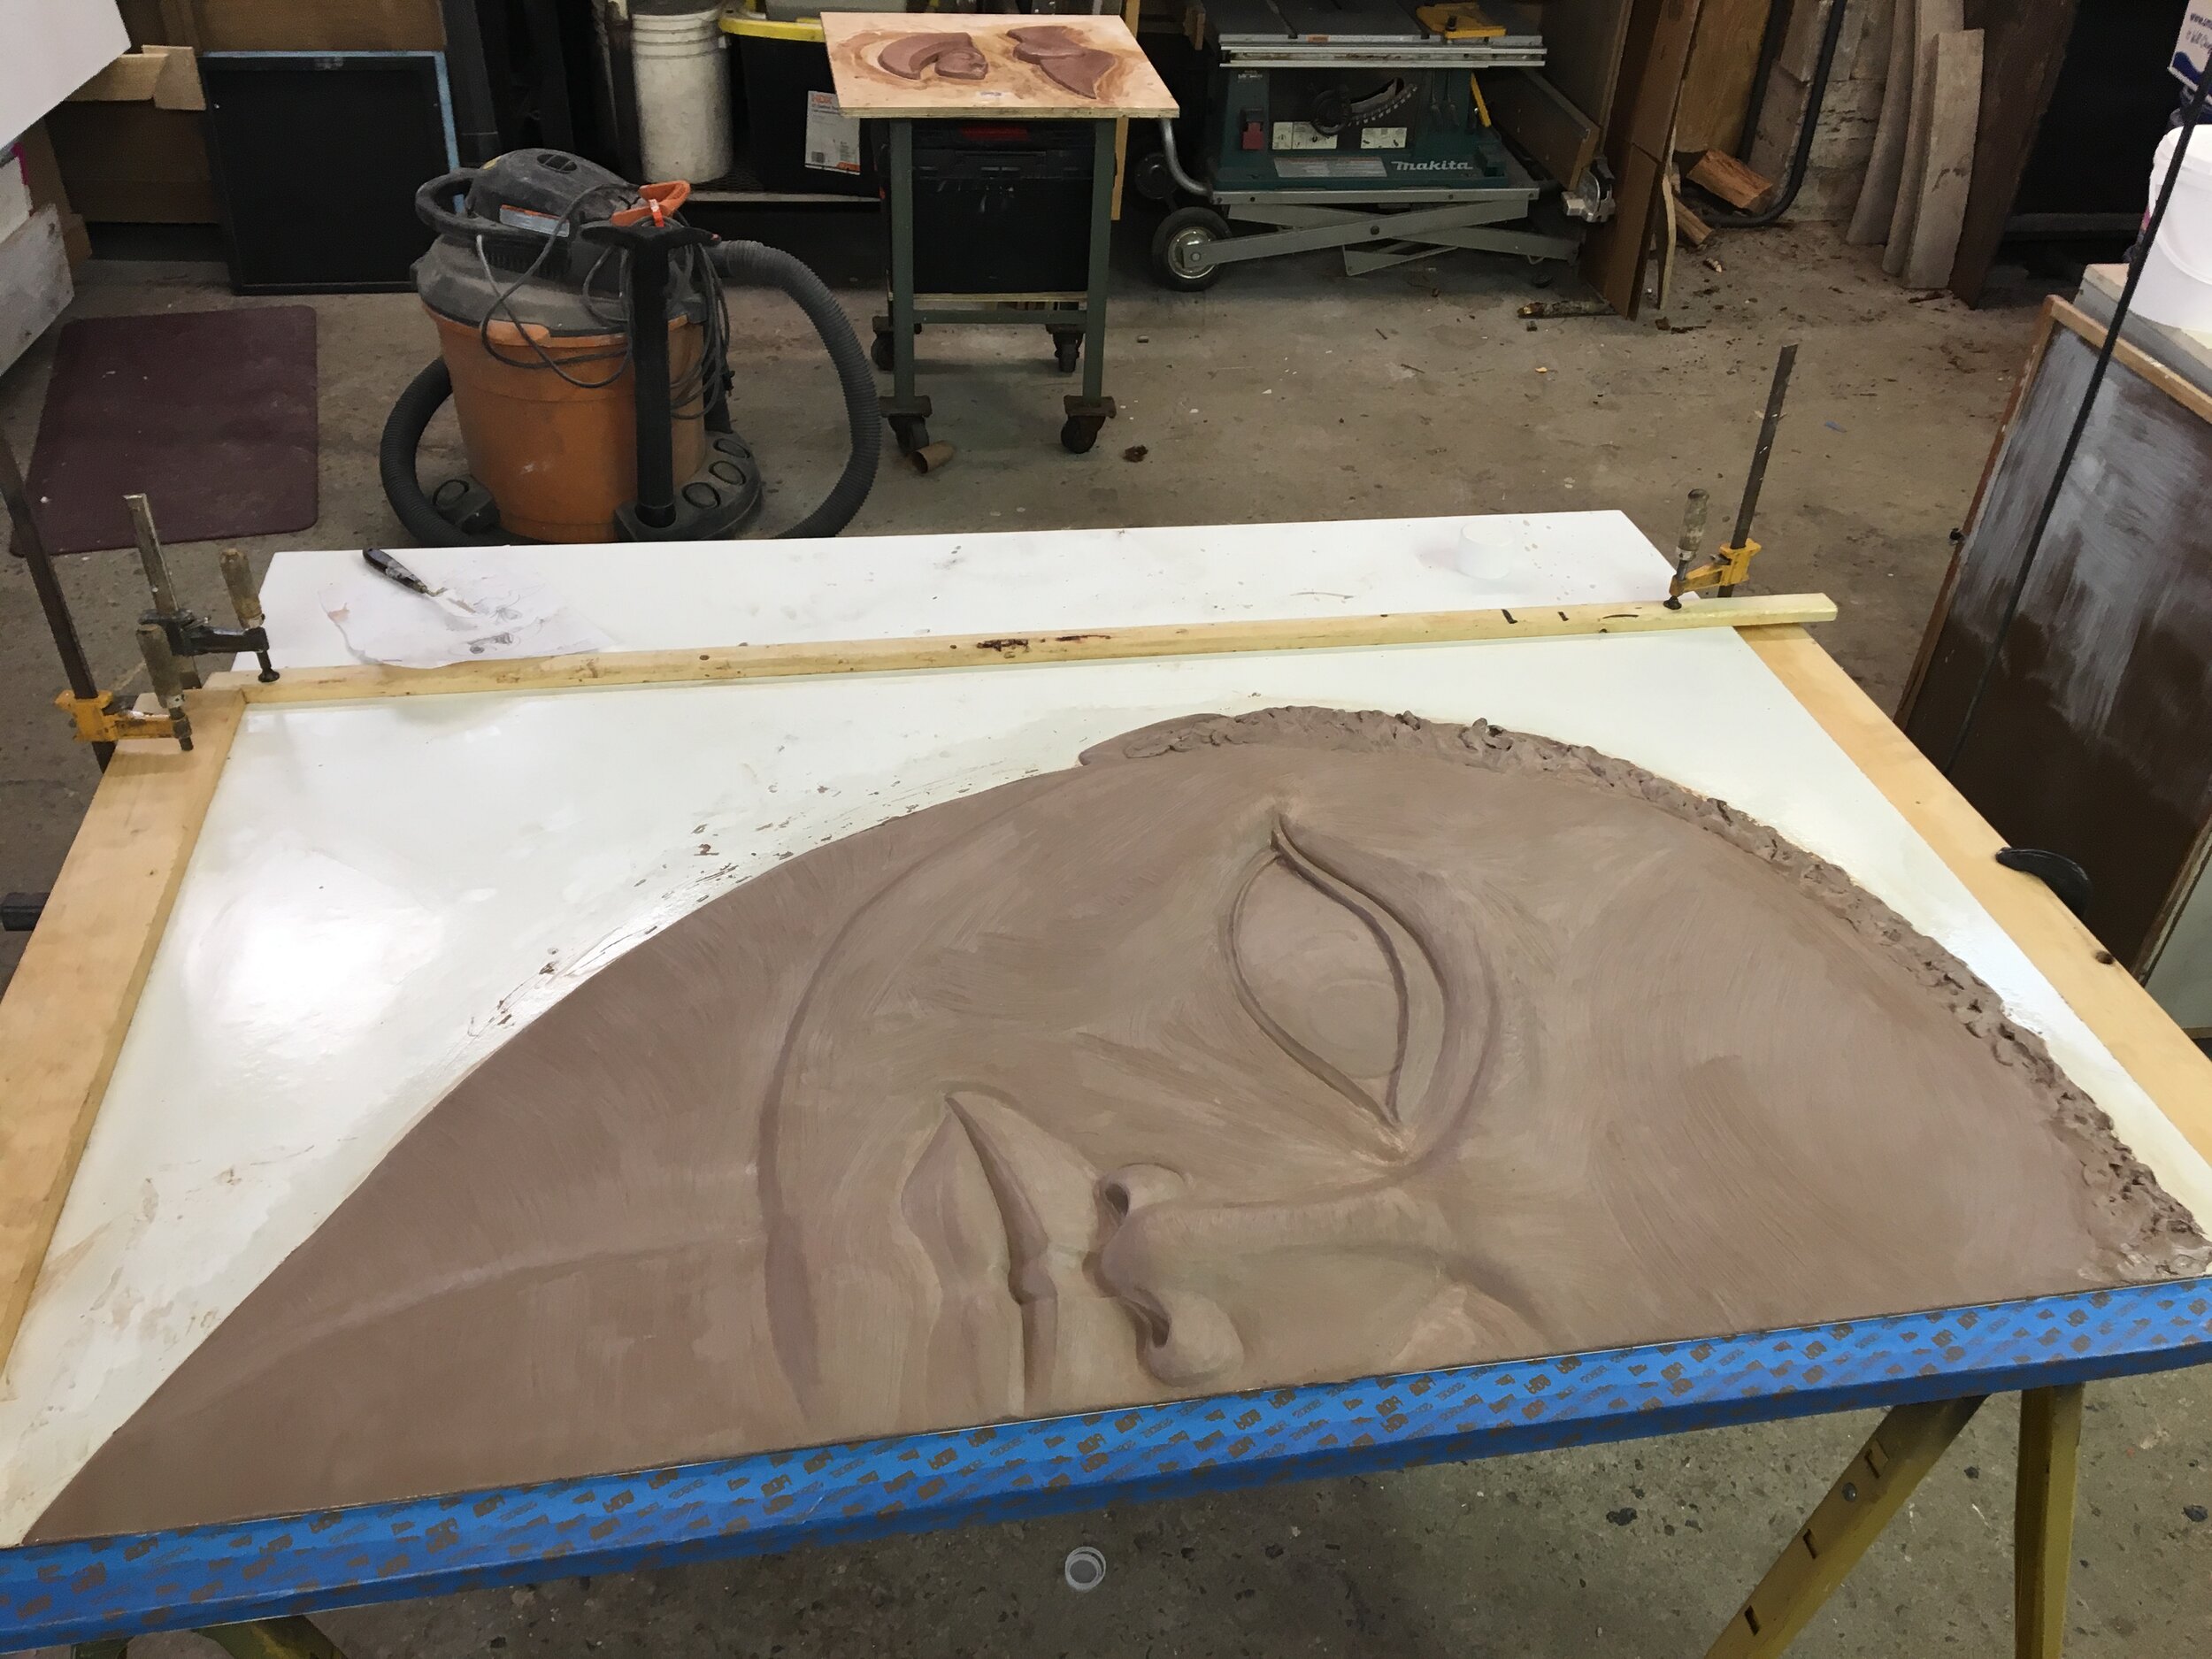  clay relief ready for mold. “American Fescue” 